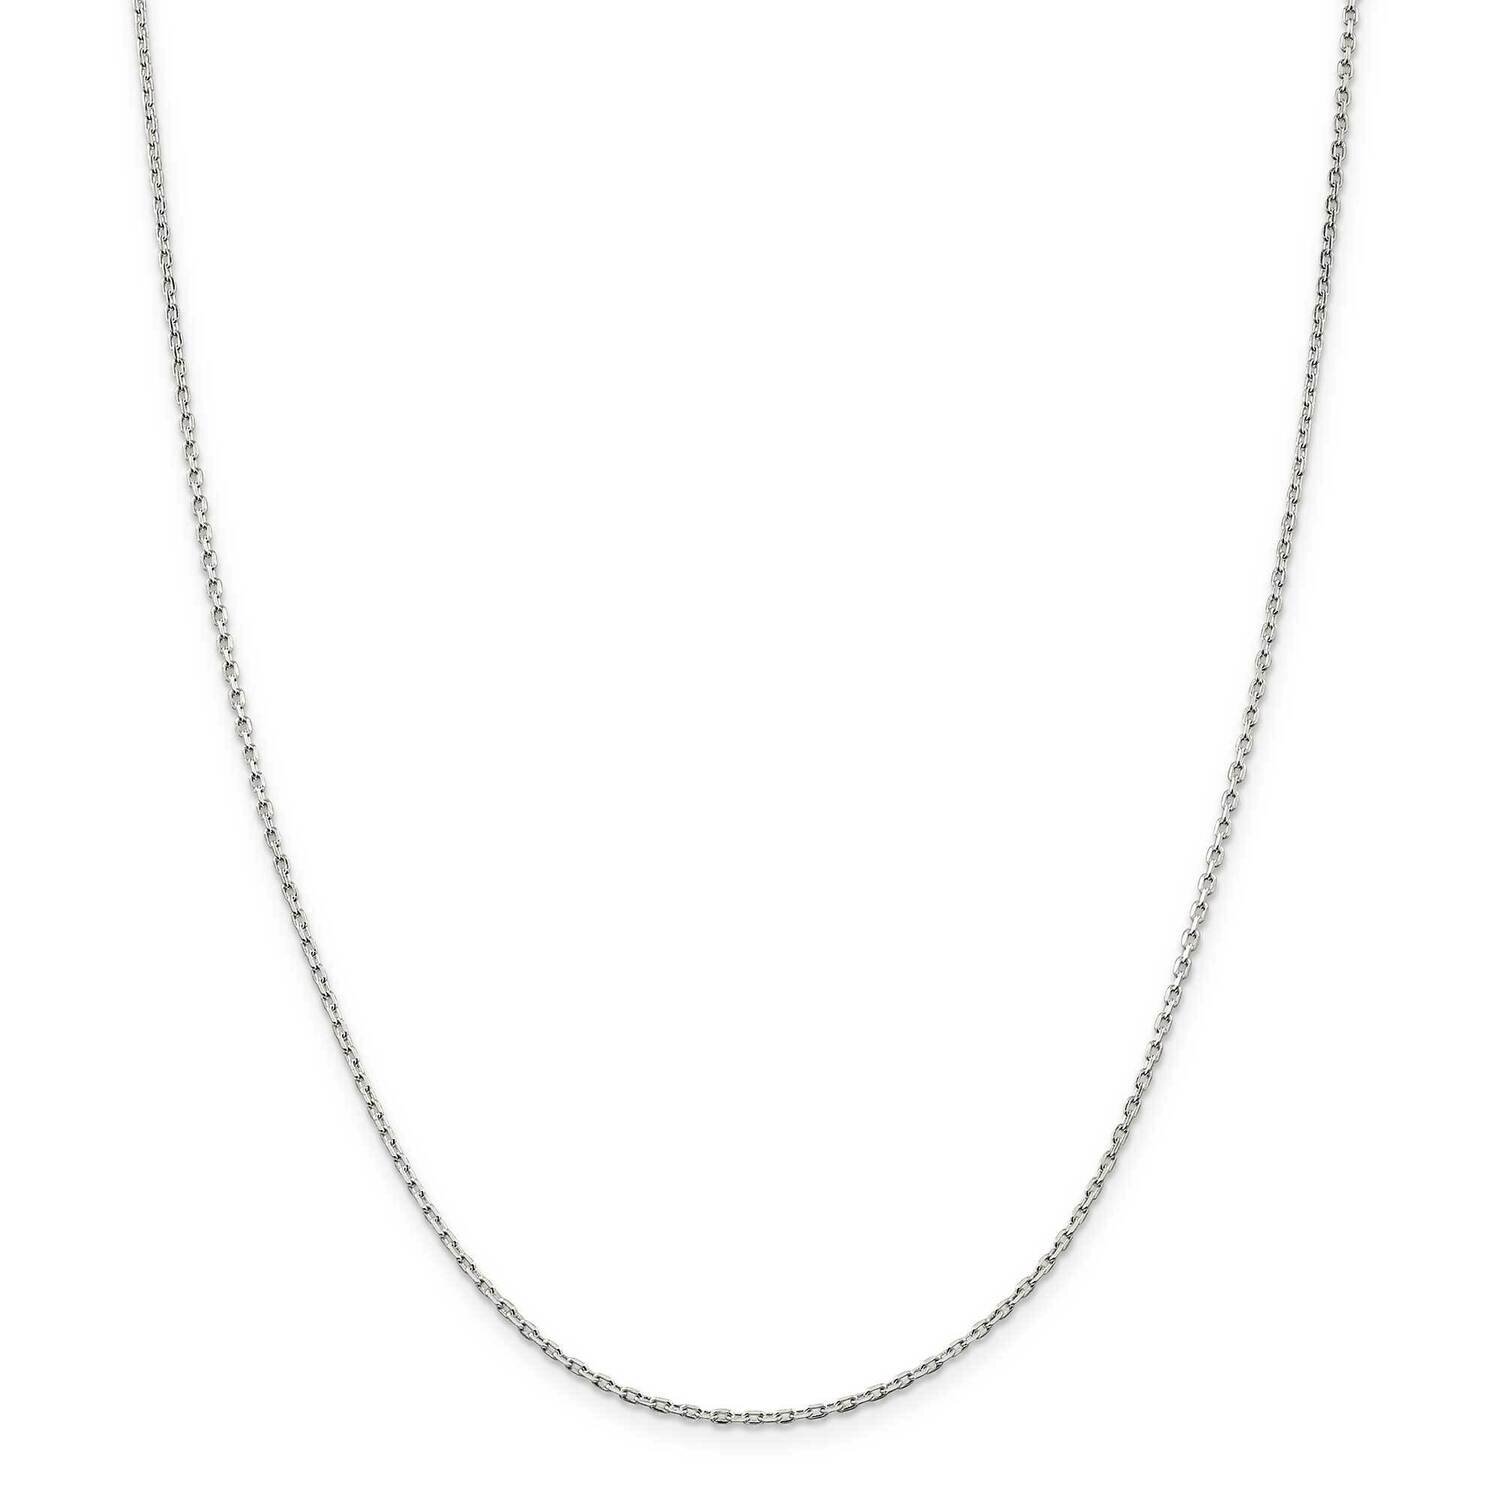 1.5mm Beveled Oval Cable Chain 28 Inch Sterling Silver QCA050-28